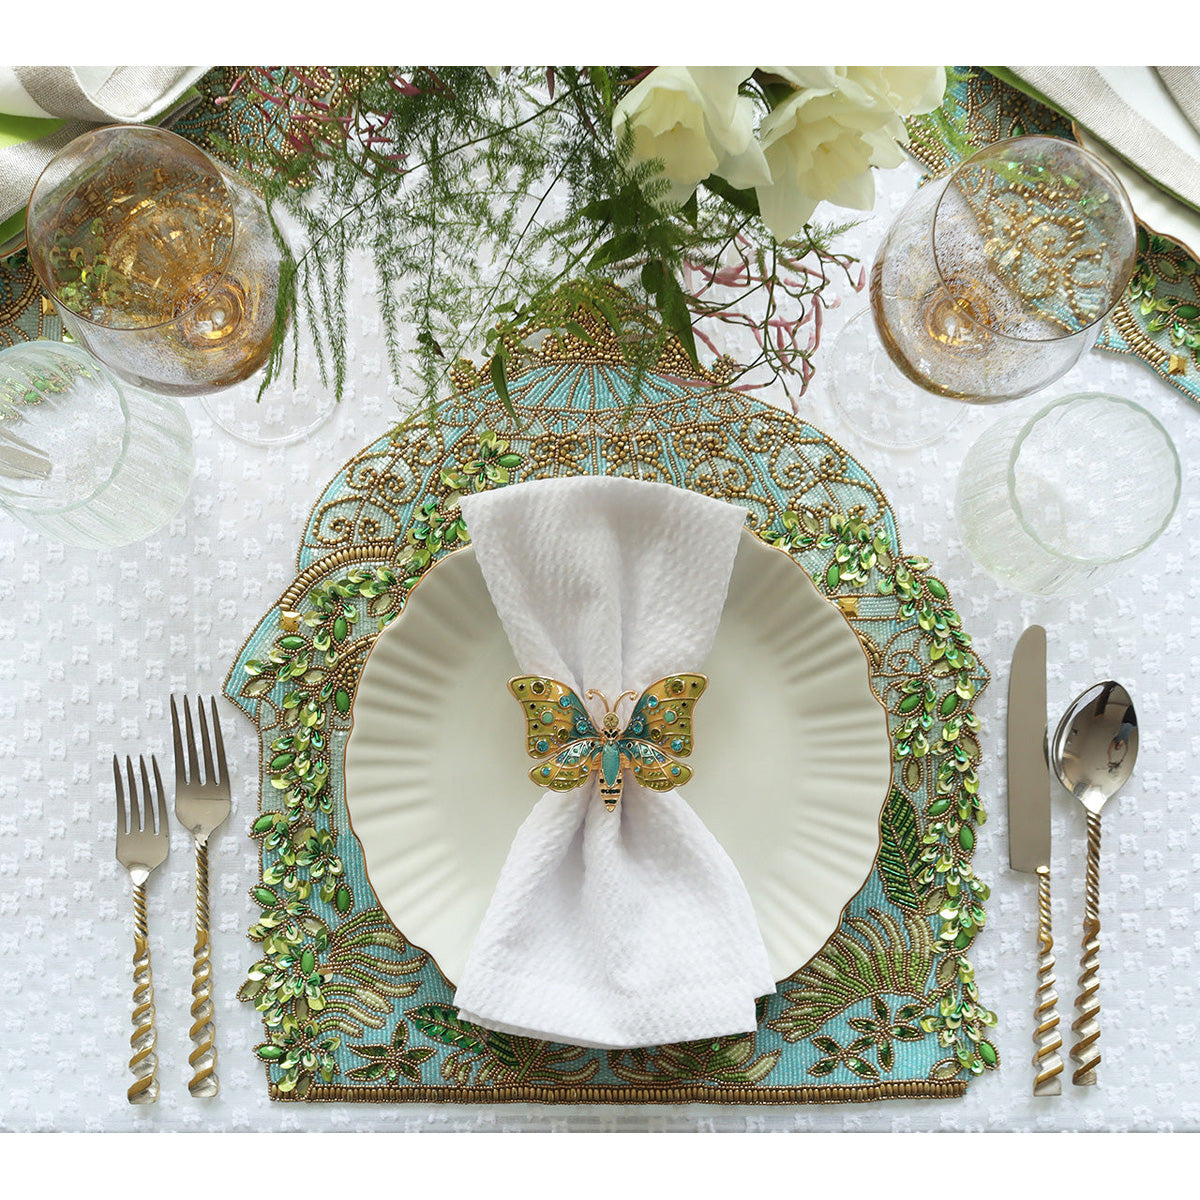 Arbor Napkin Ring in Blue & Green - Set of 4 in a Gift Box by Kim Seybert Additional Image-2